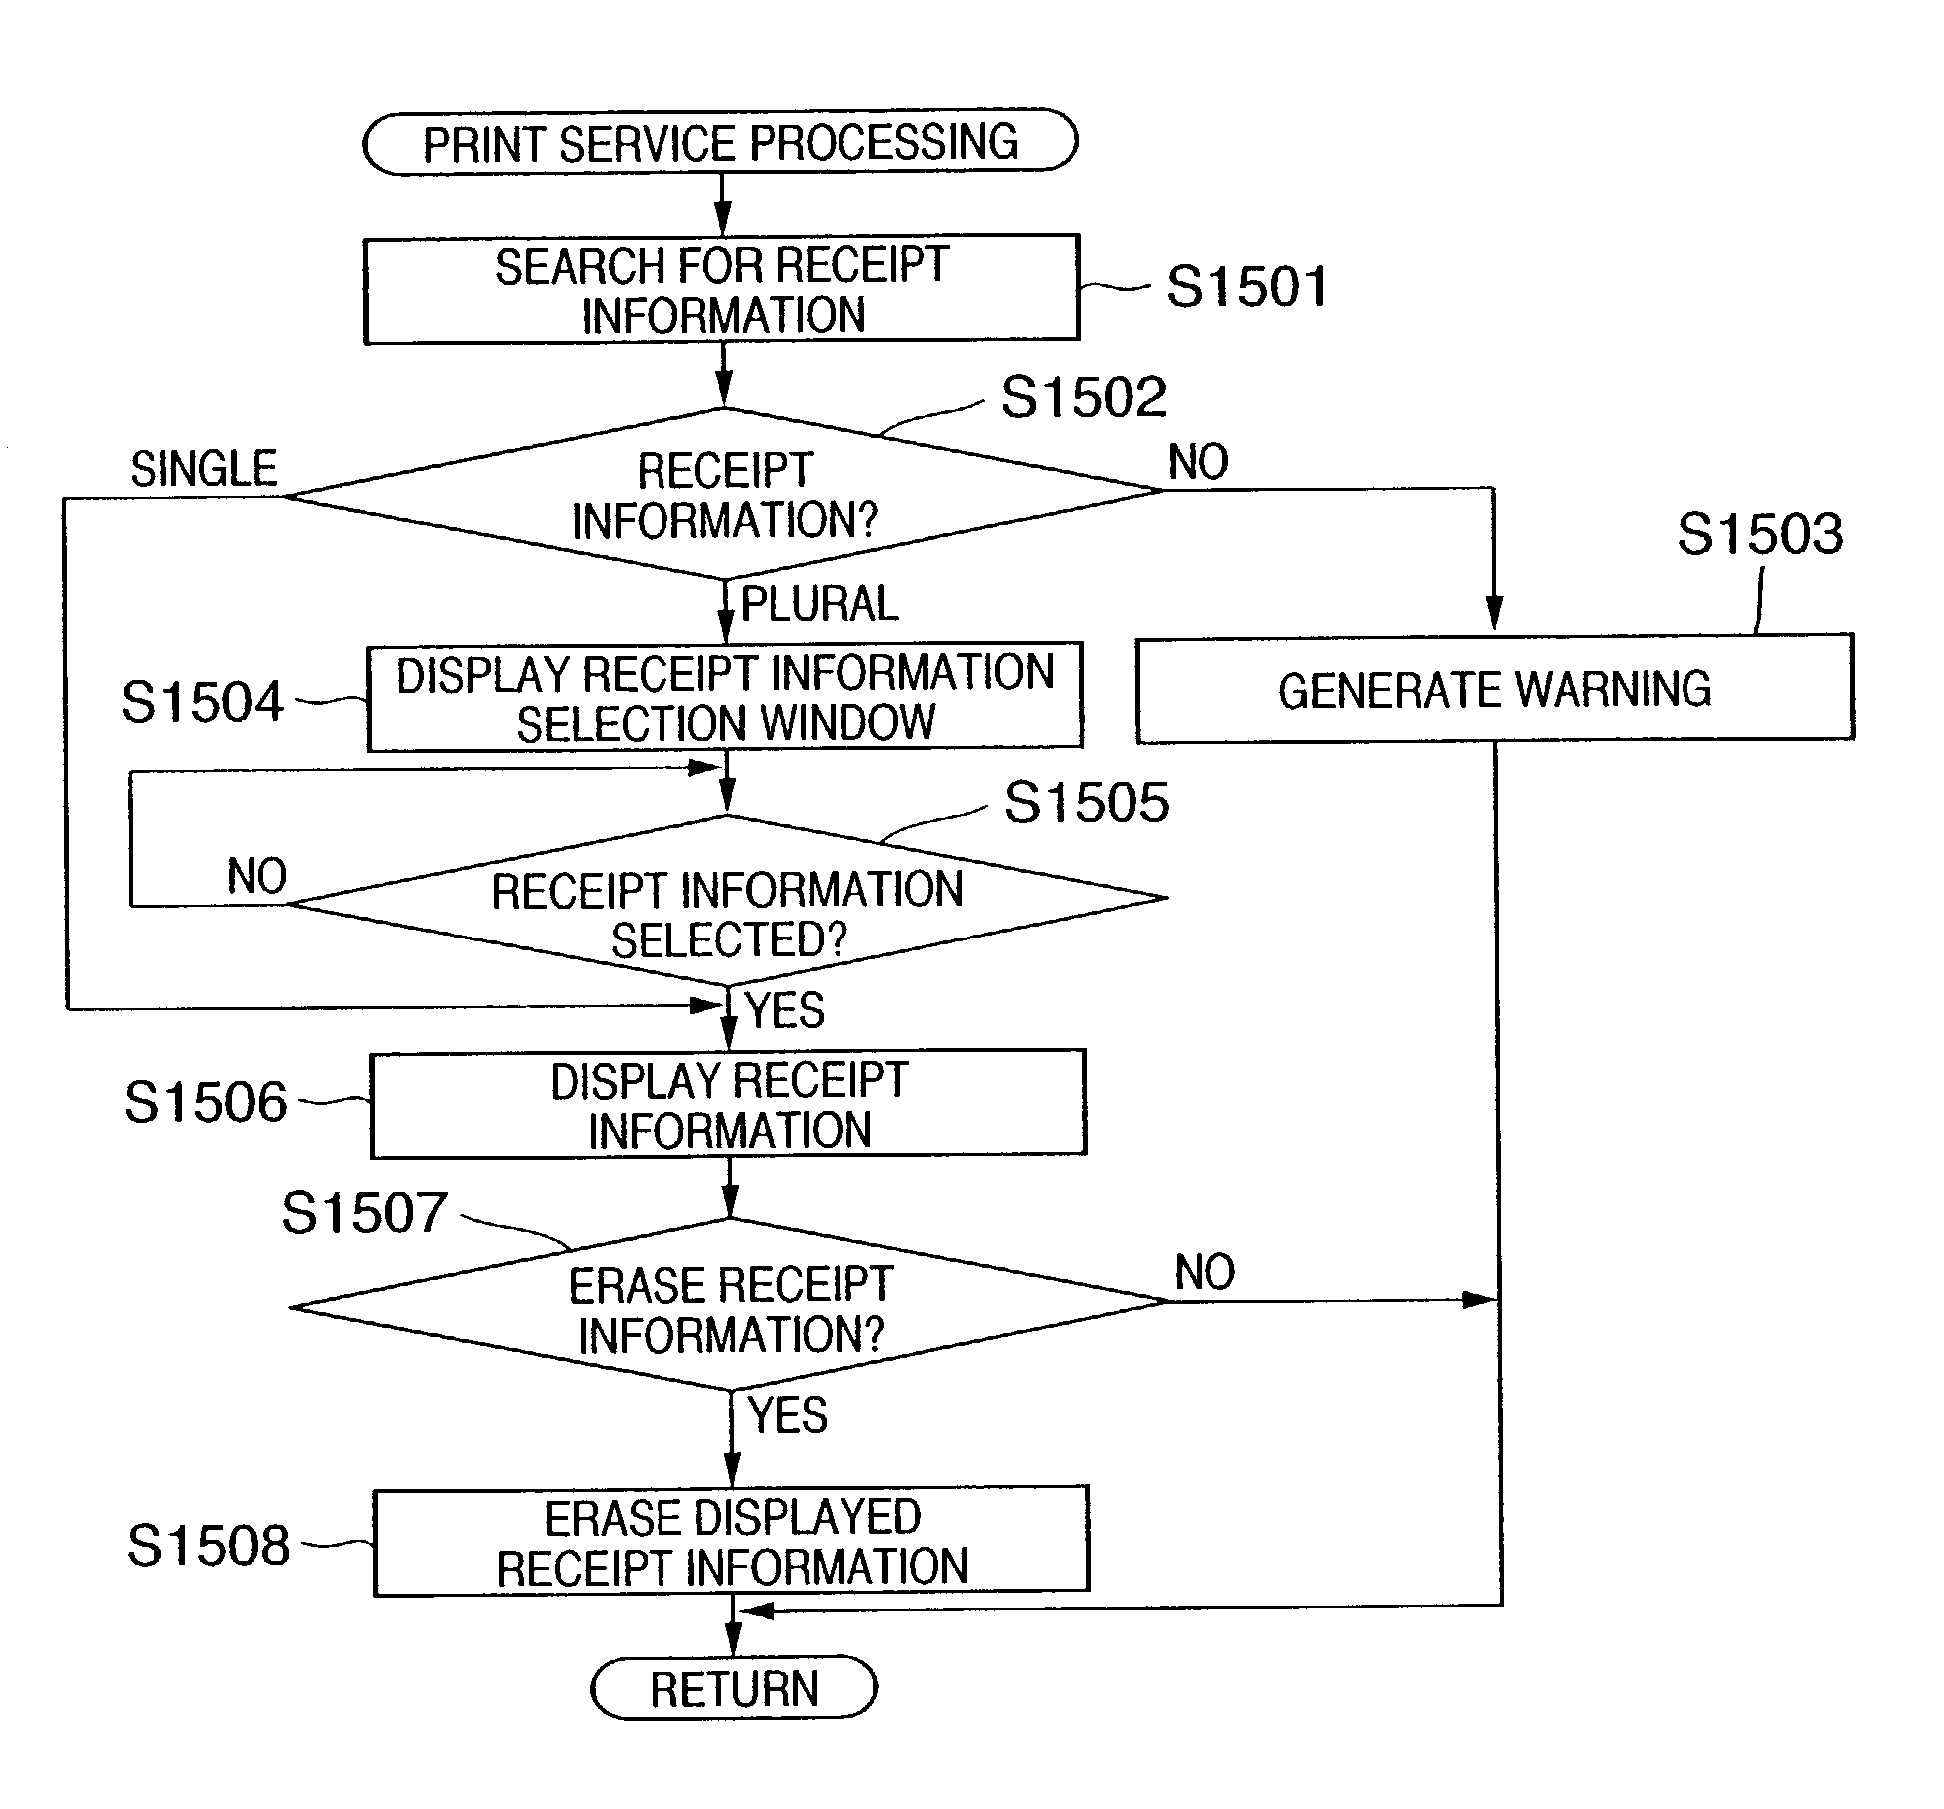 Image sensing apparatus, information processing apparatus, control method for these apparatuses, image processing apparatus and method, and image processing system